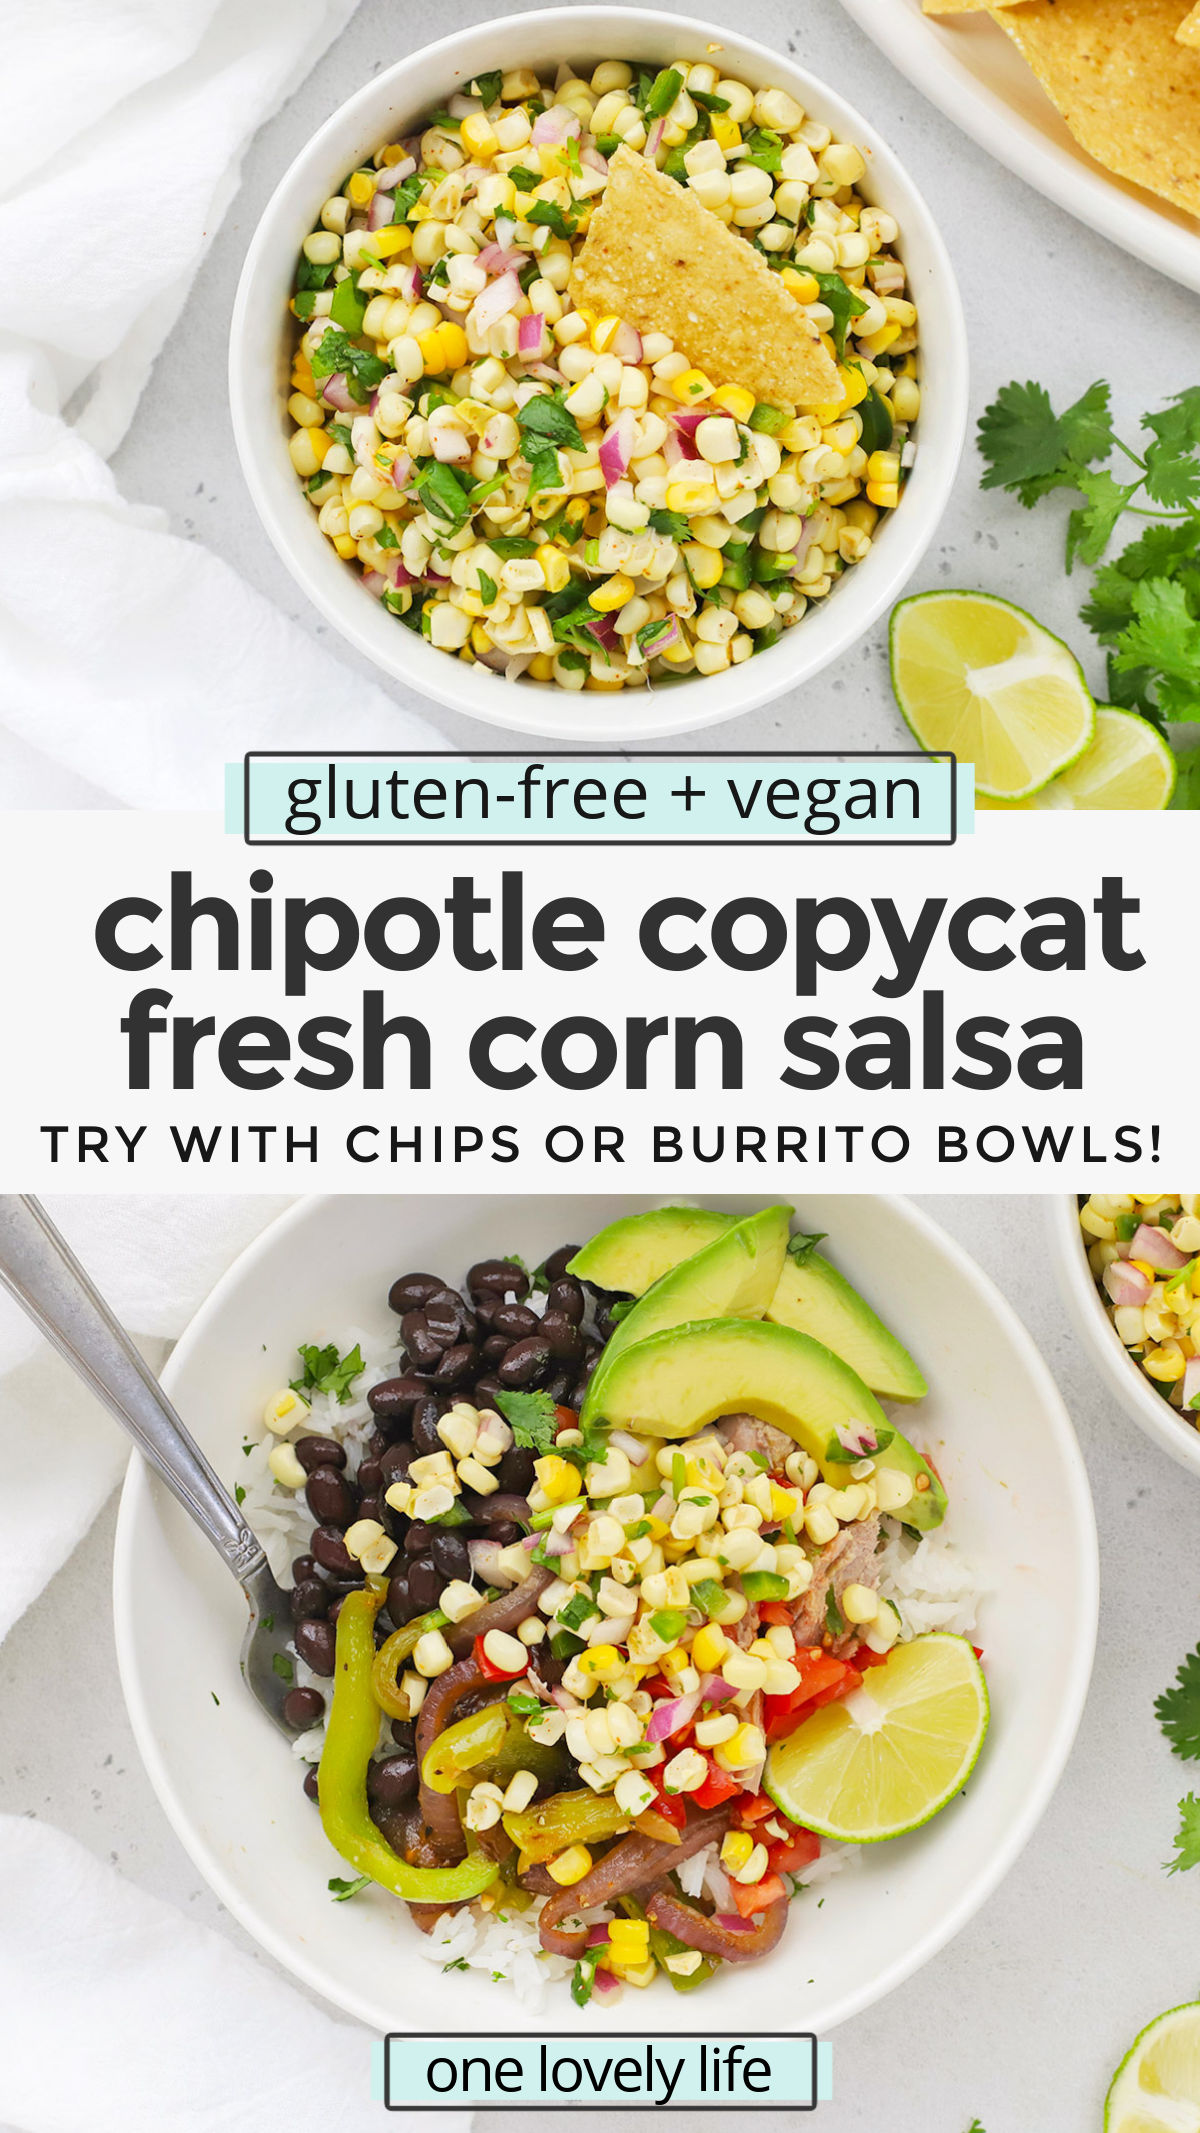 Better-Than-Chipotle Corn Salsa - Our easy fresh corn salsa recipe is incredible with chips, burrito bowls tacos, and so much more! // Chipotle Copycat Corn Salsa // Chipotle Corn Salsa Recipe // Summer Corn Salsa // Best Corn Salsa REcipe // Corn Recipes // Burrito Bowls // Homemade Salsa